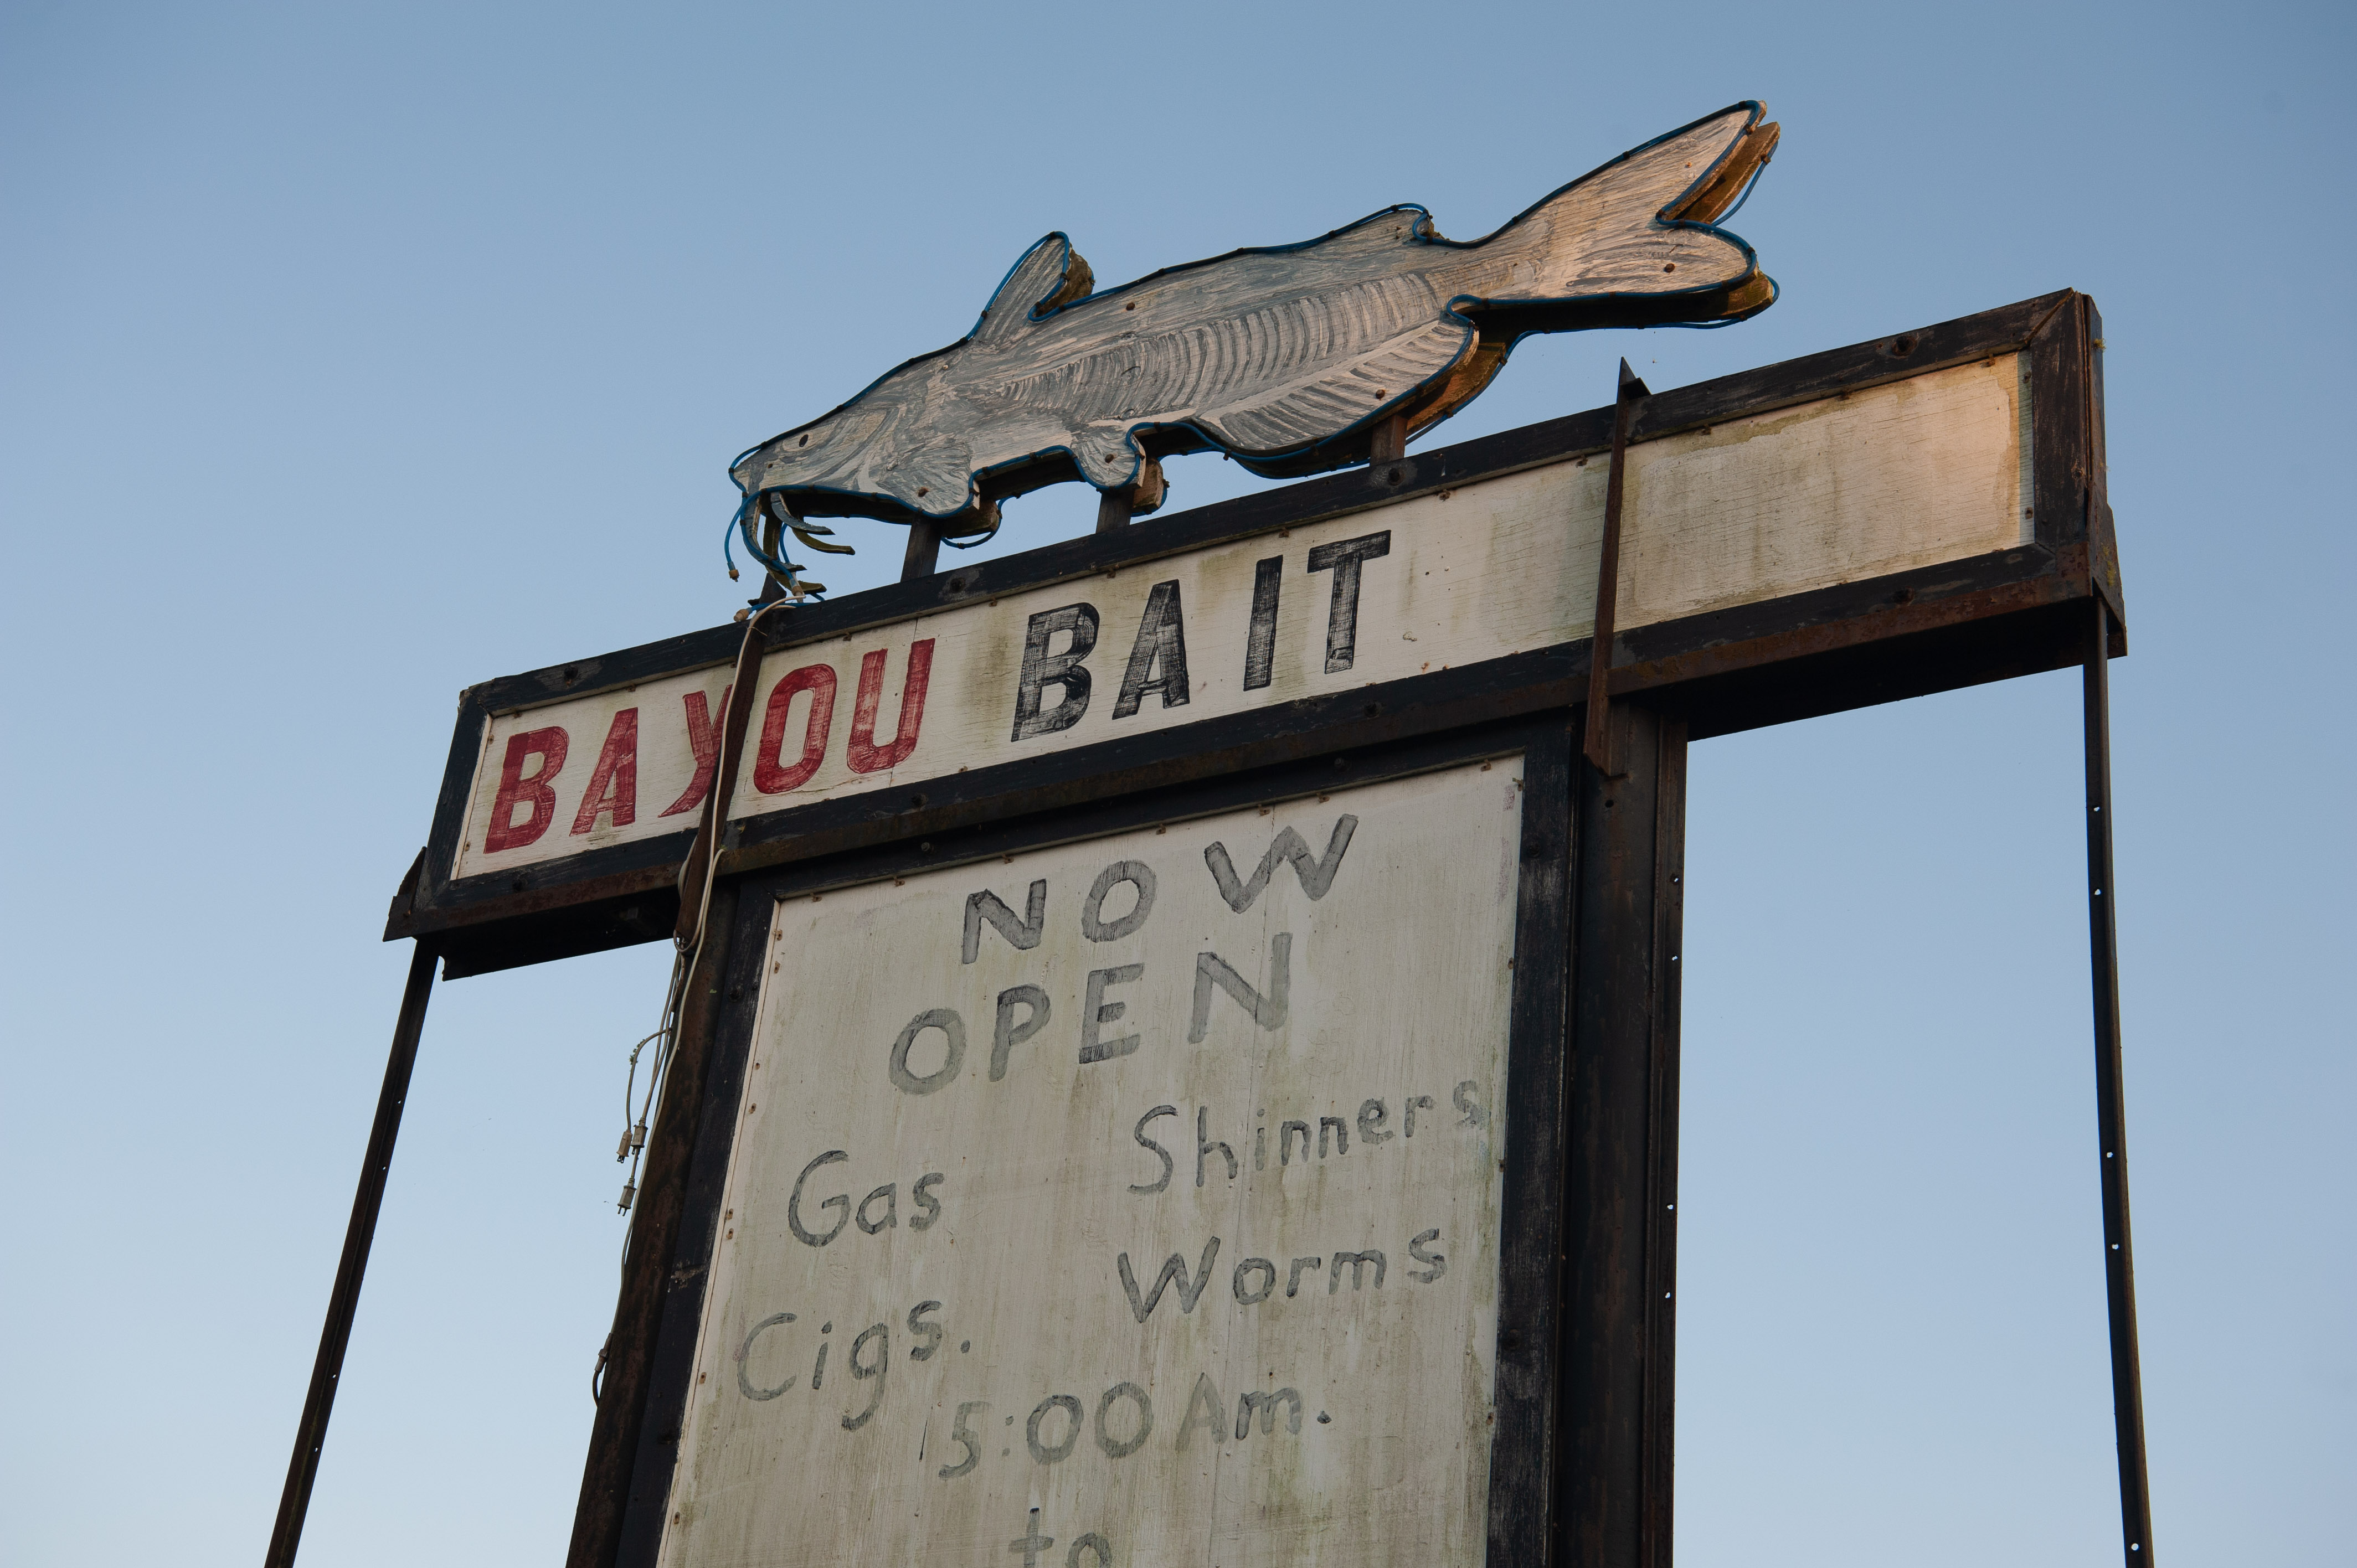 A faded sign for the Bayou Bait shop. 